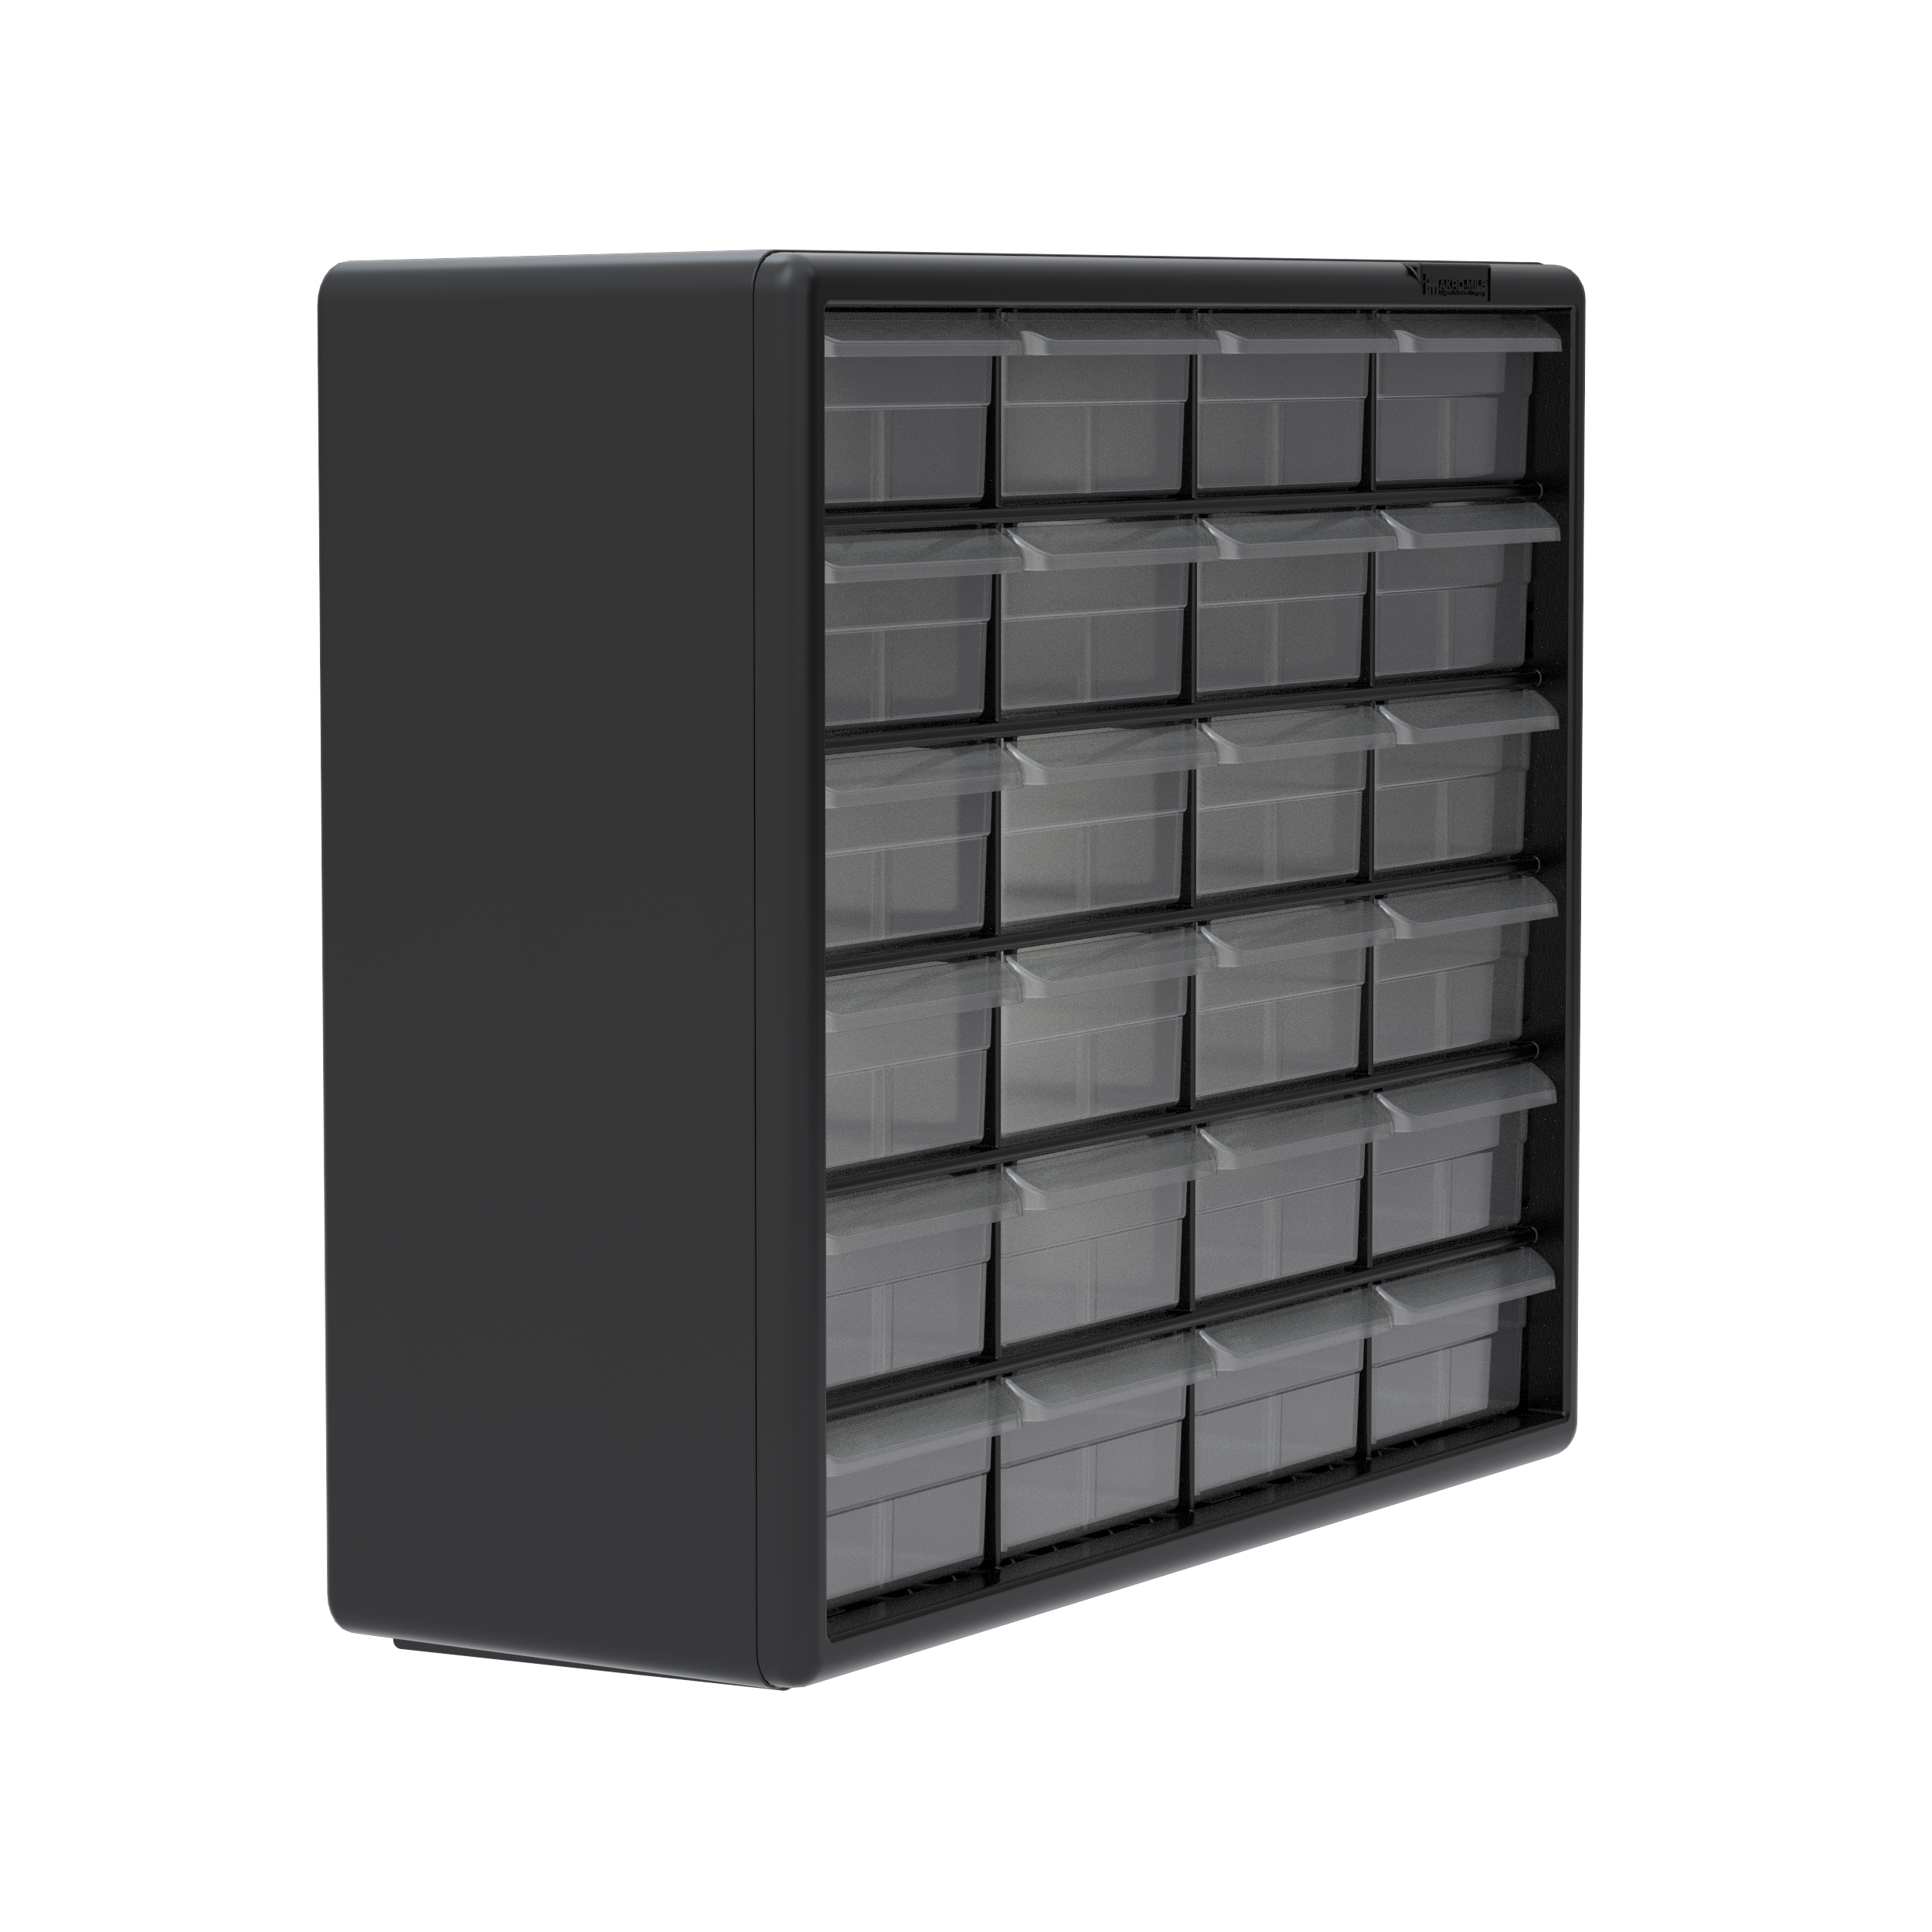 Akro-Mils 24 Drawer Plastic Storage Organizer with Drawers for Hardware,  Small Parts, Craft Supplies, Black